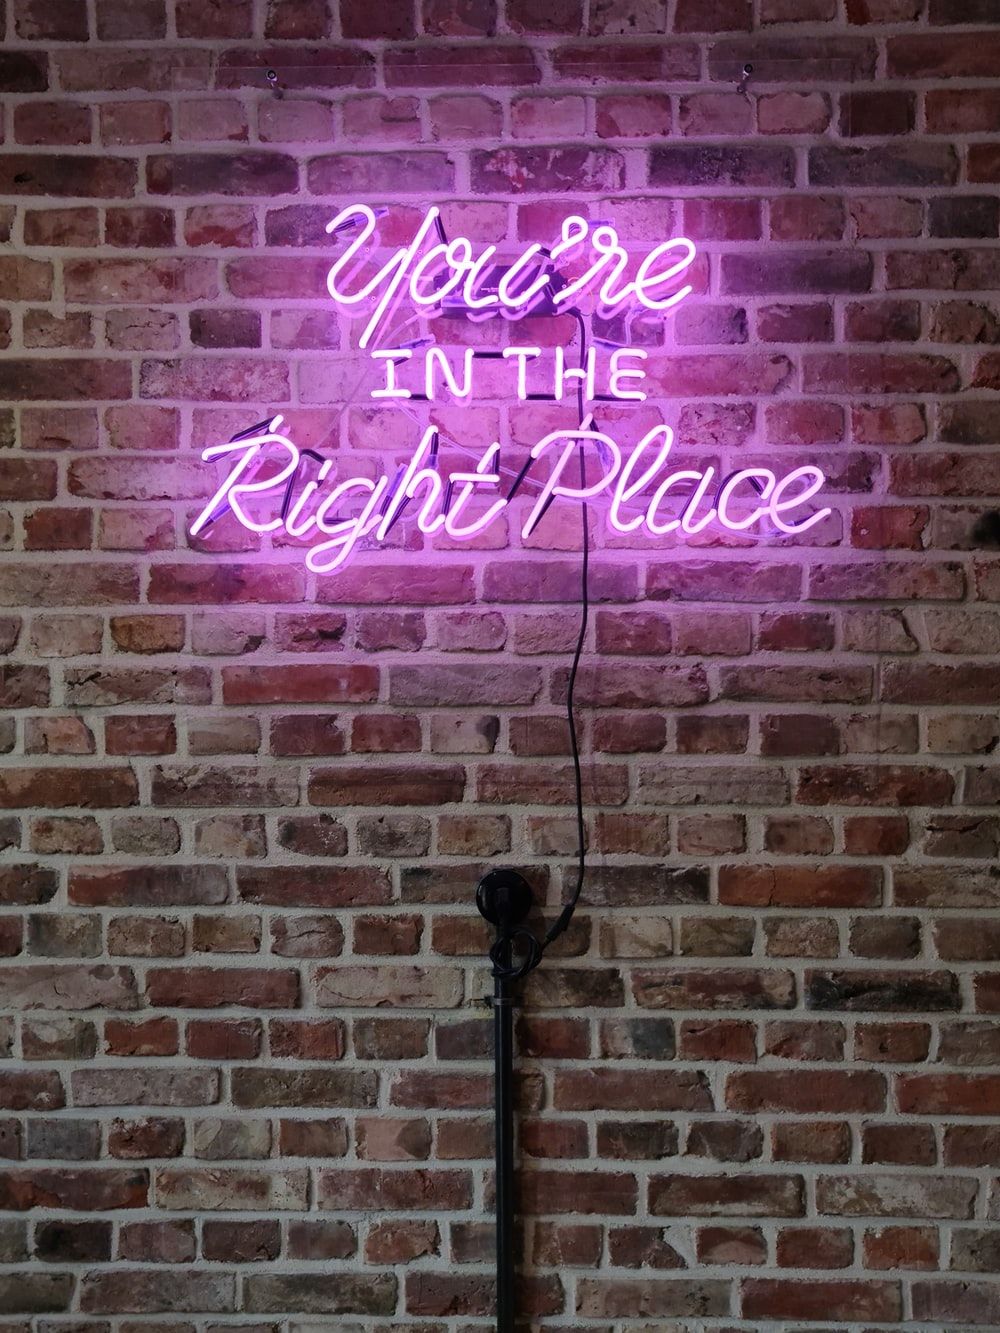 Brick Wall Neon Picture. Download Free Image